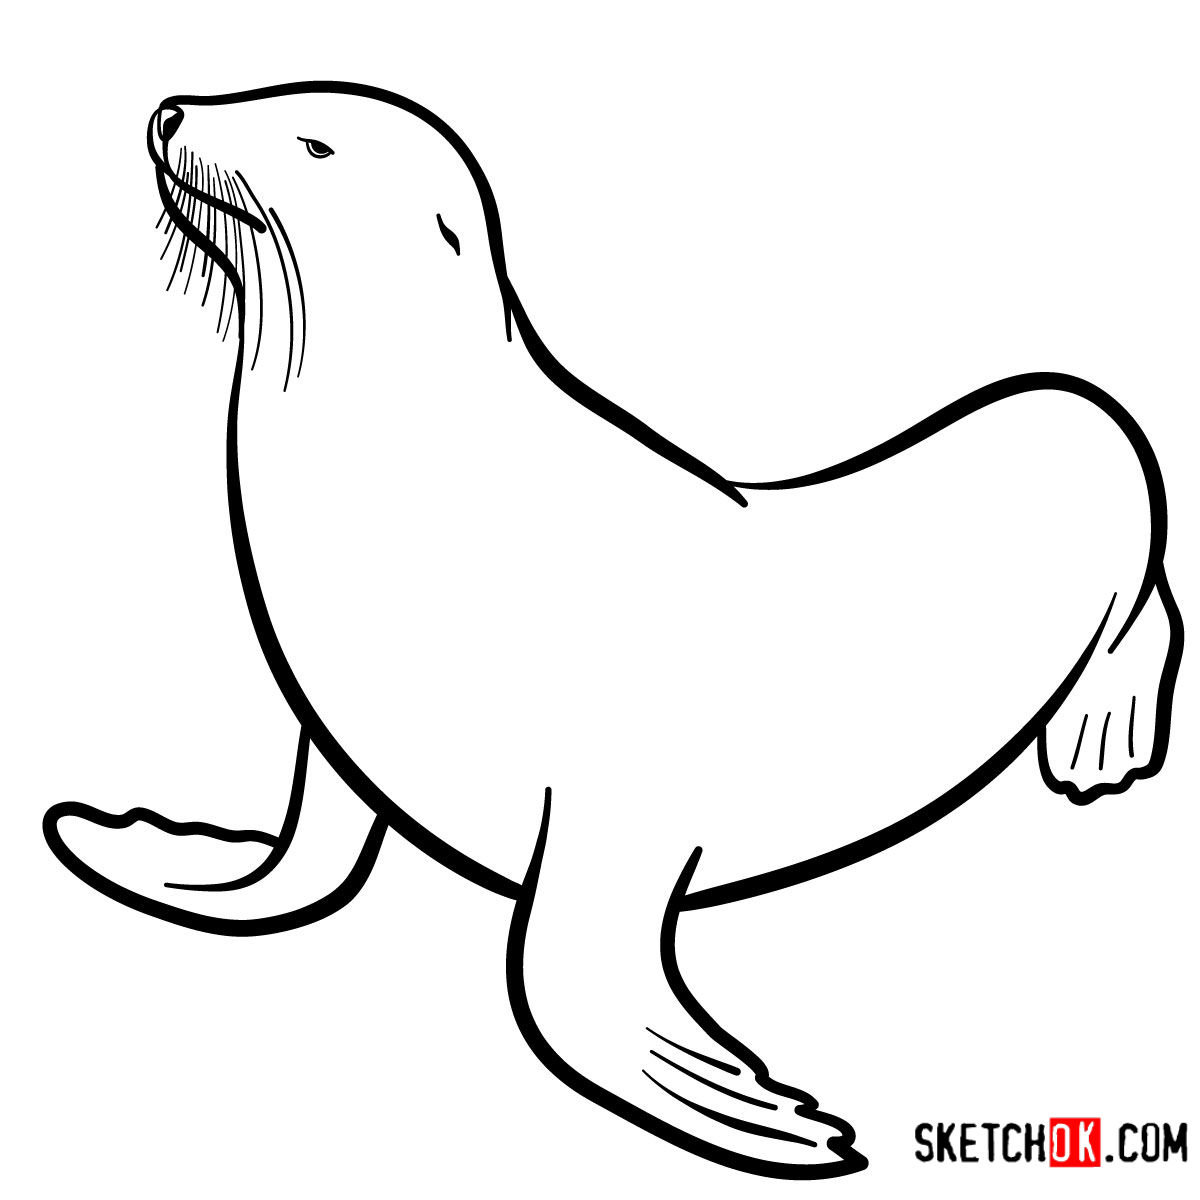 How to draw a Sea lion